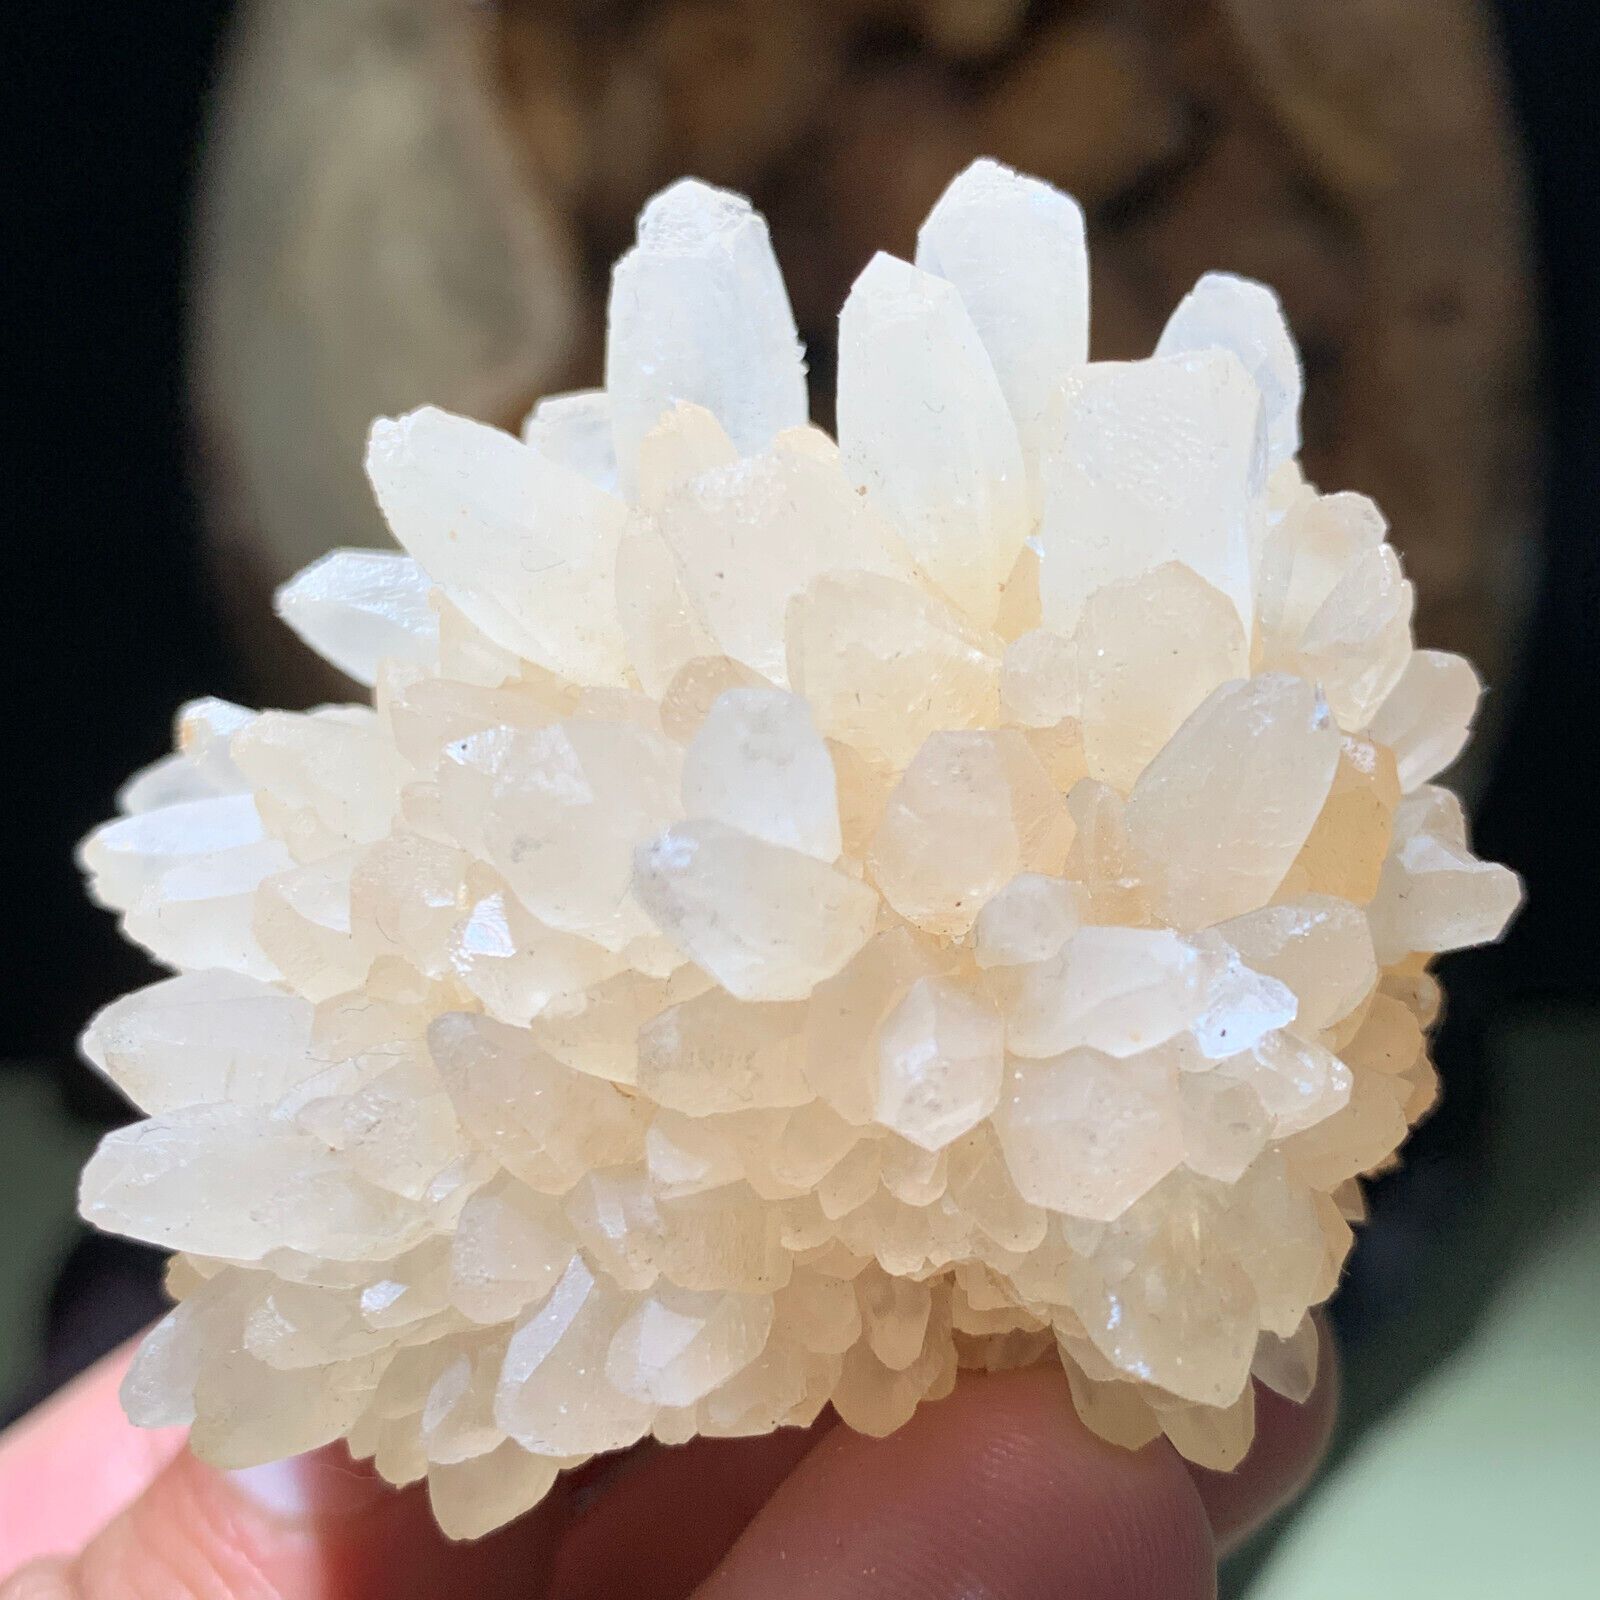 Newly discovered natural rare sheet calcite mineral specimen/C​hina-D654